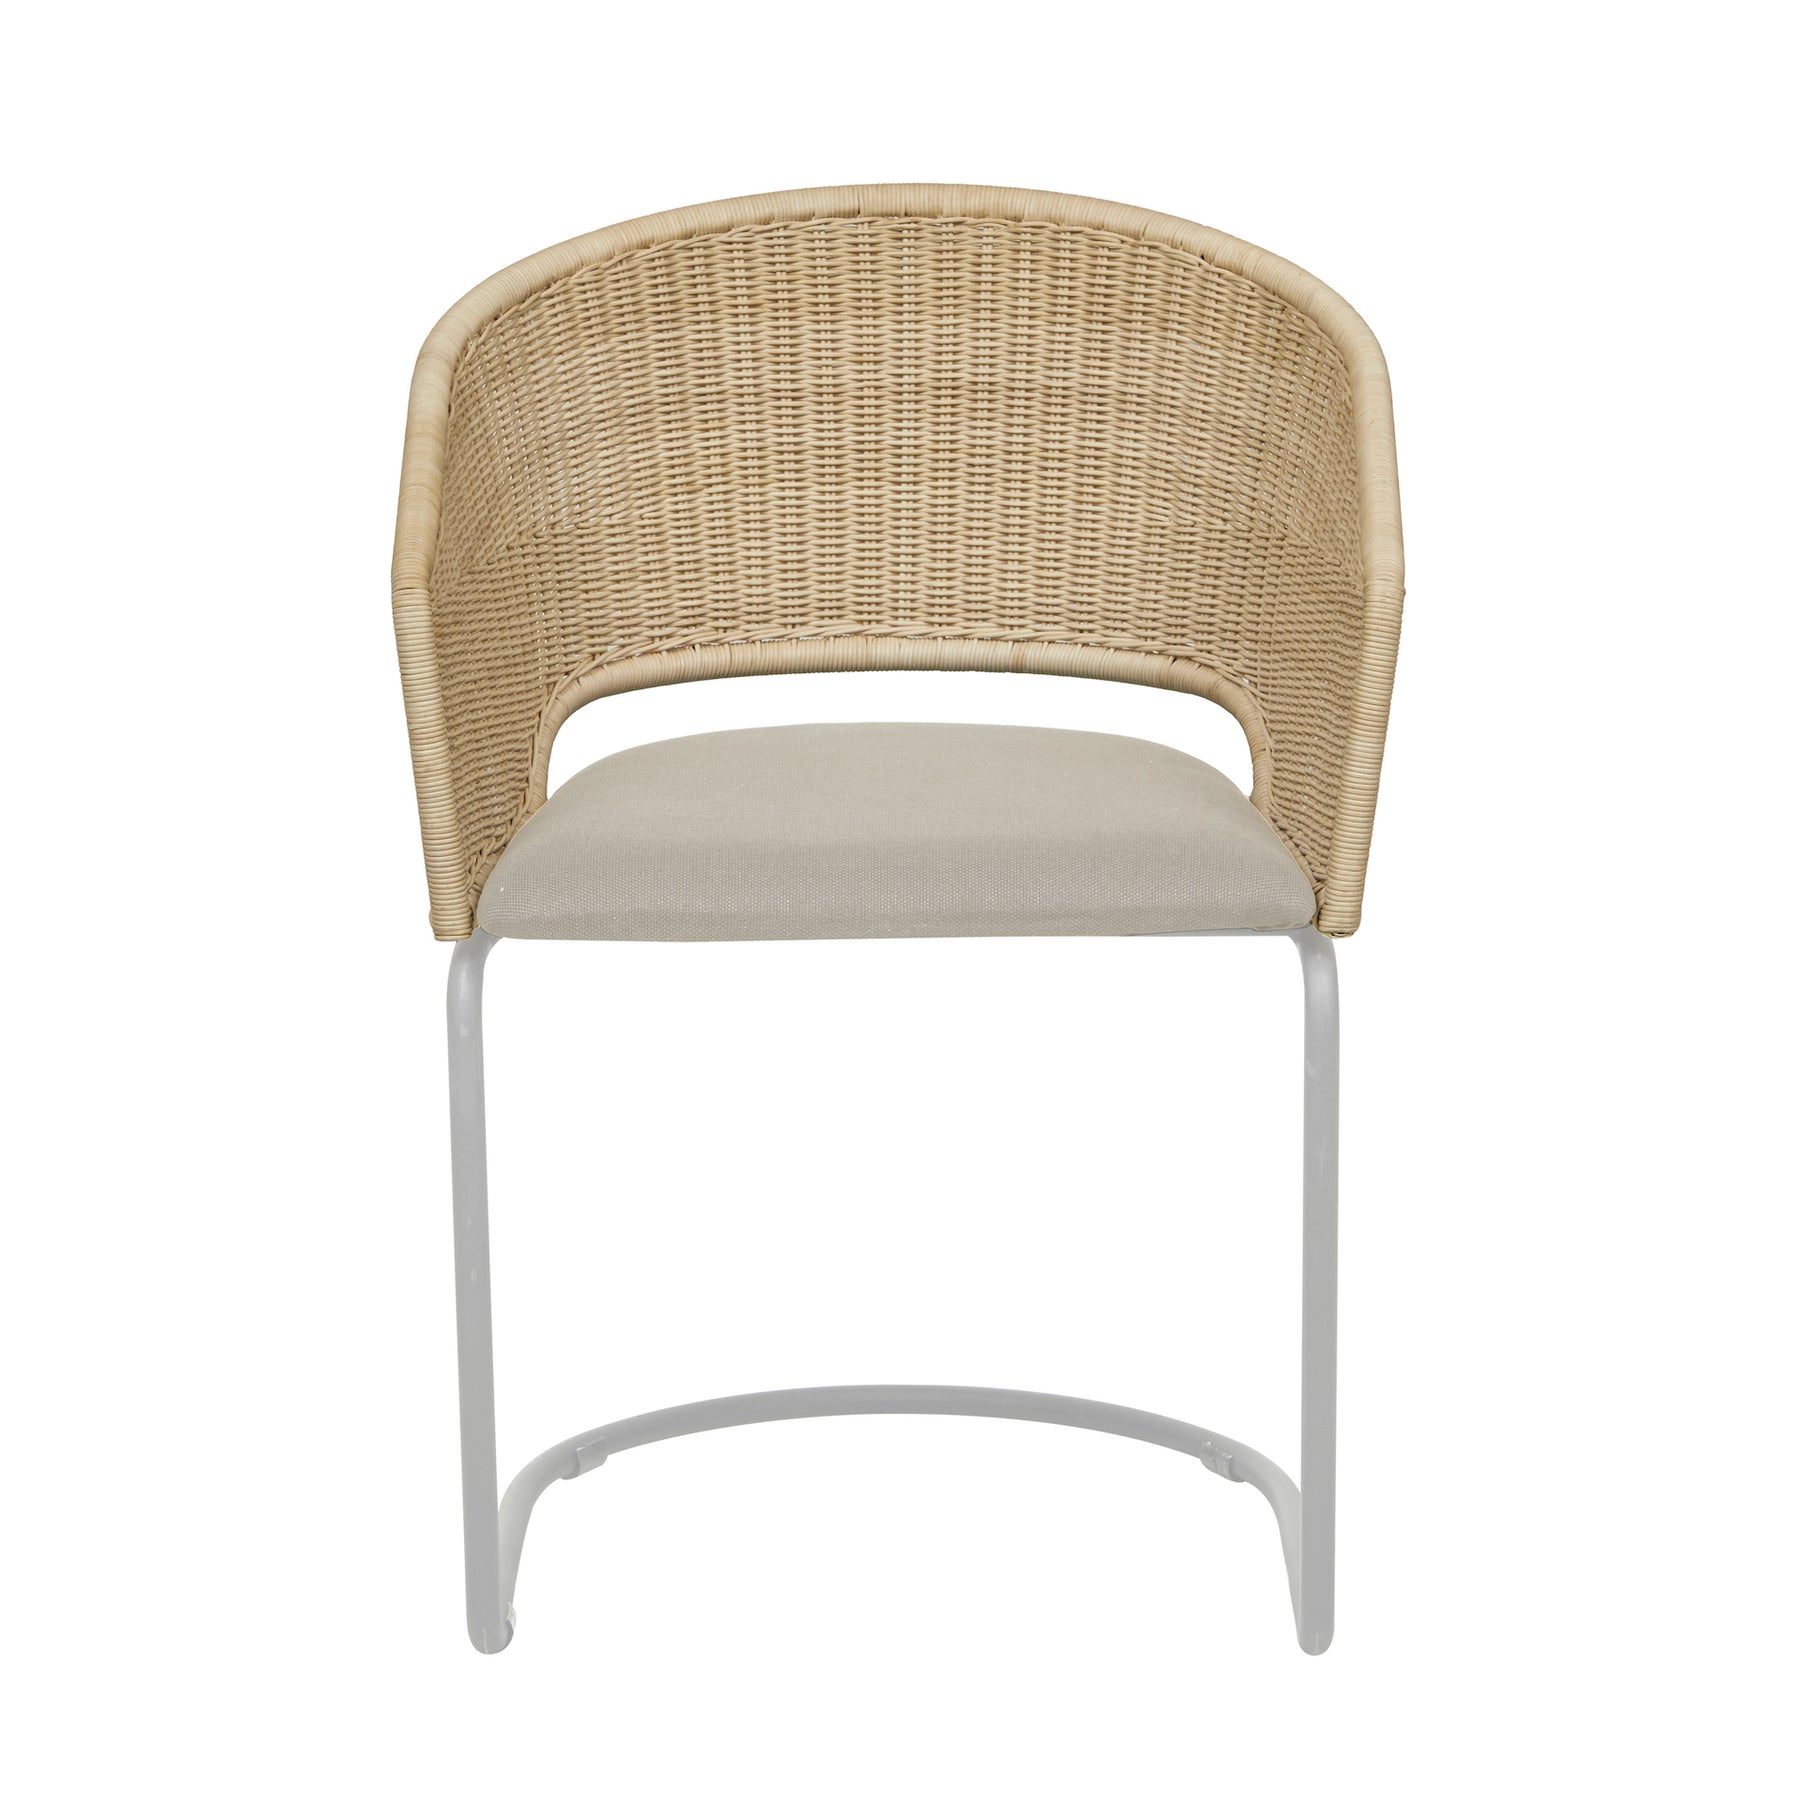 Weaver Cantilev Dining Chair